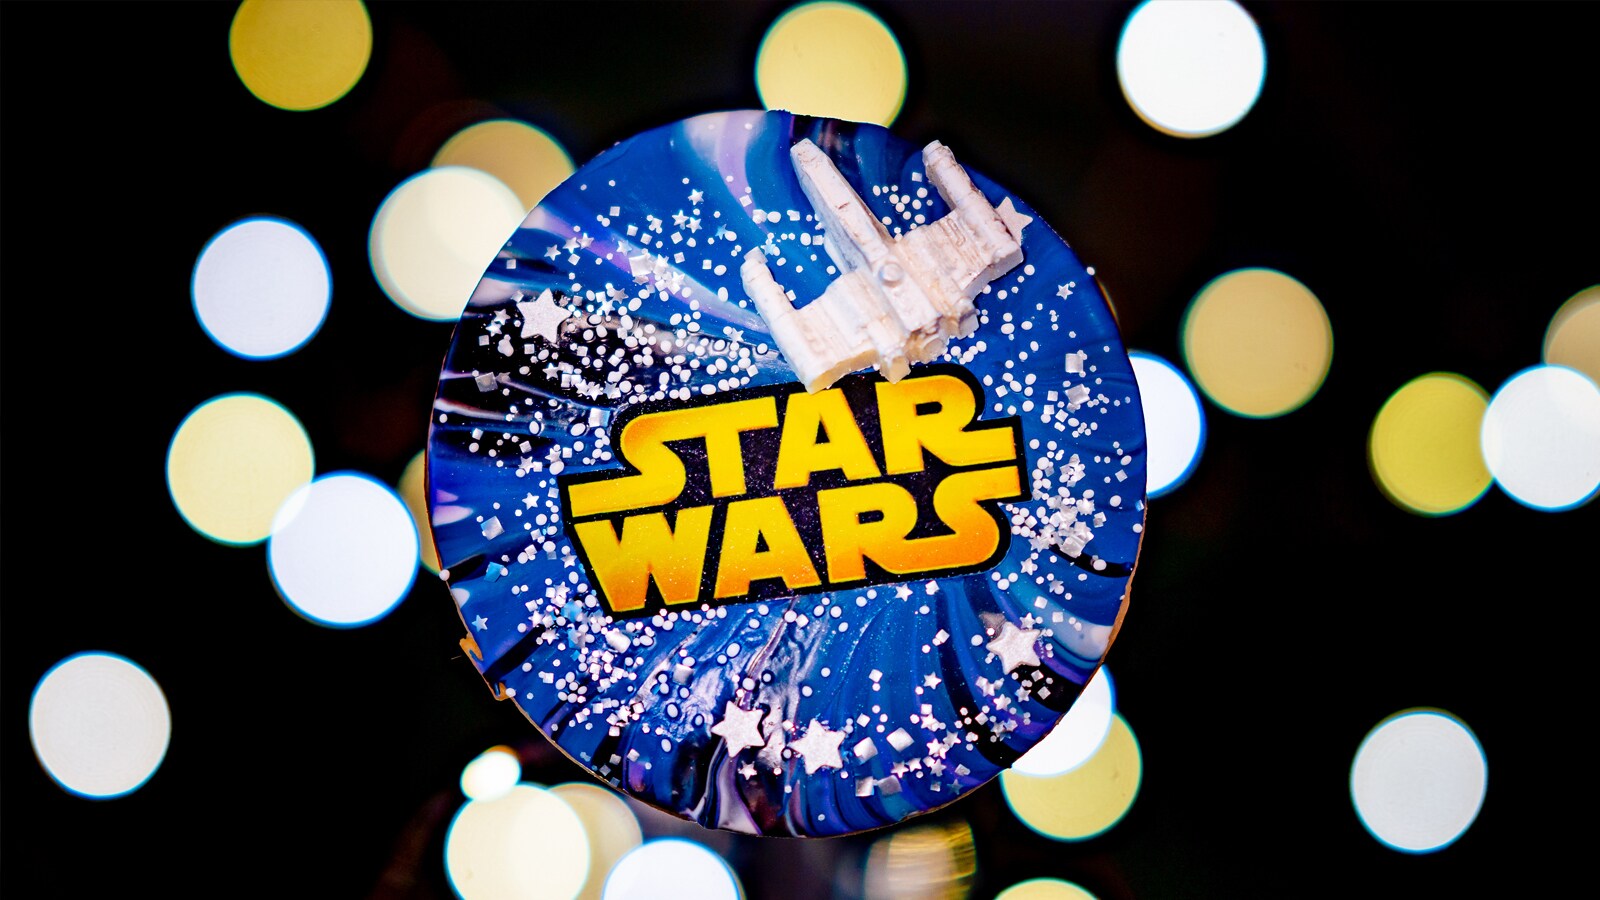 Feast Your Eyes Upon the Galactic Treats Coming to Season of the Force at Disneyland Park - Exclusive